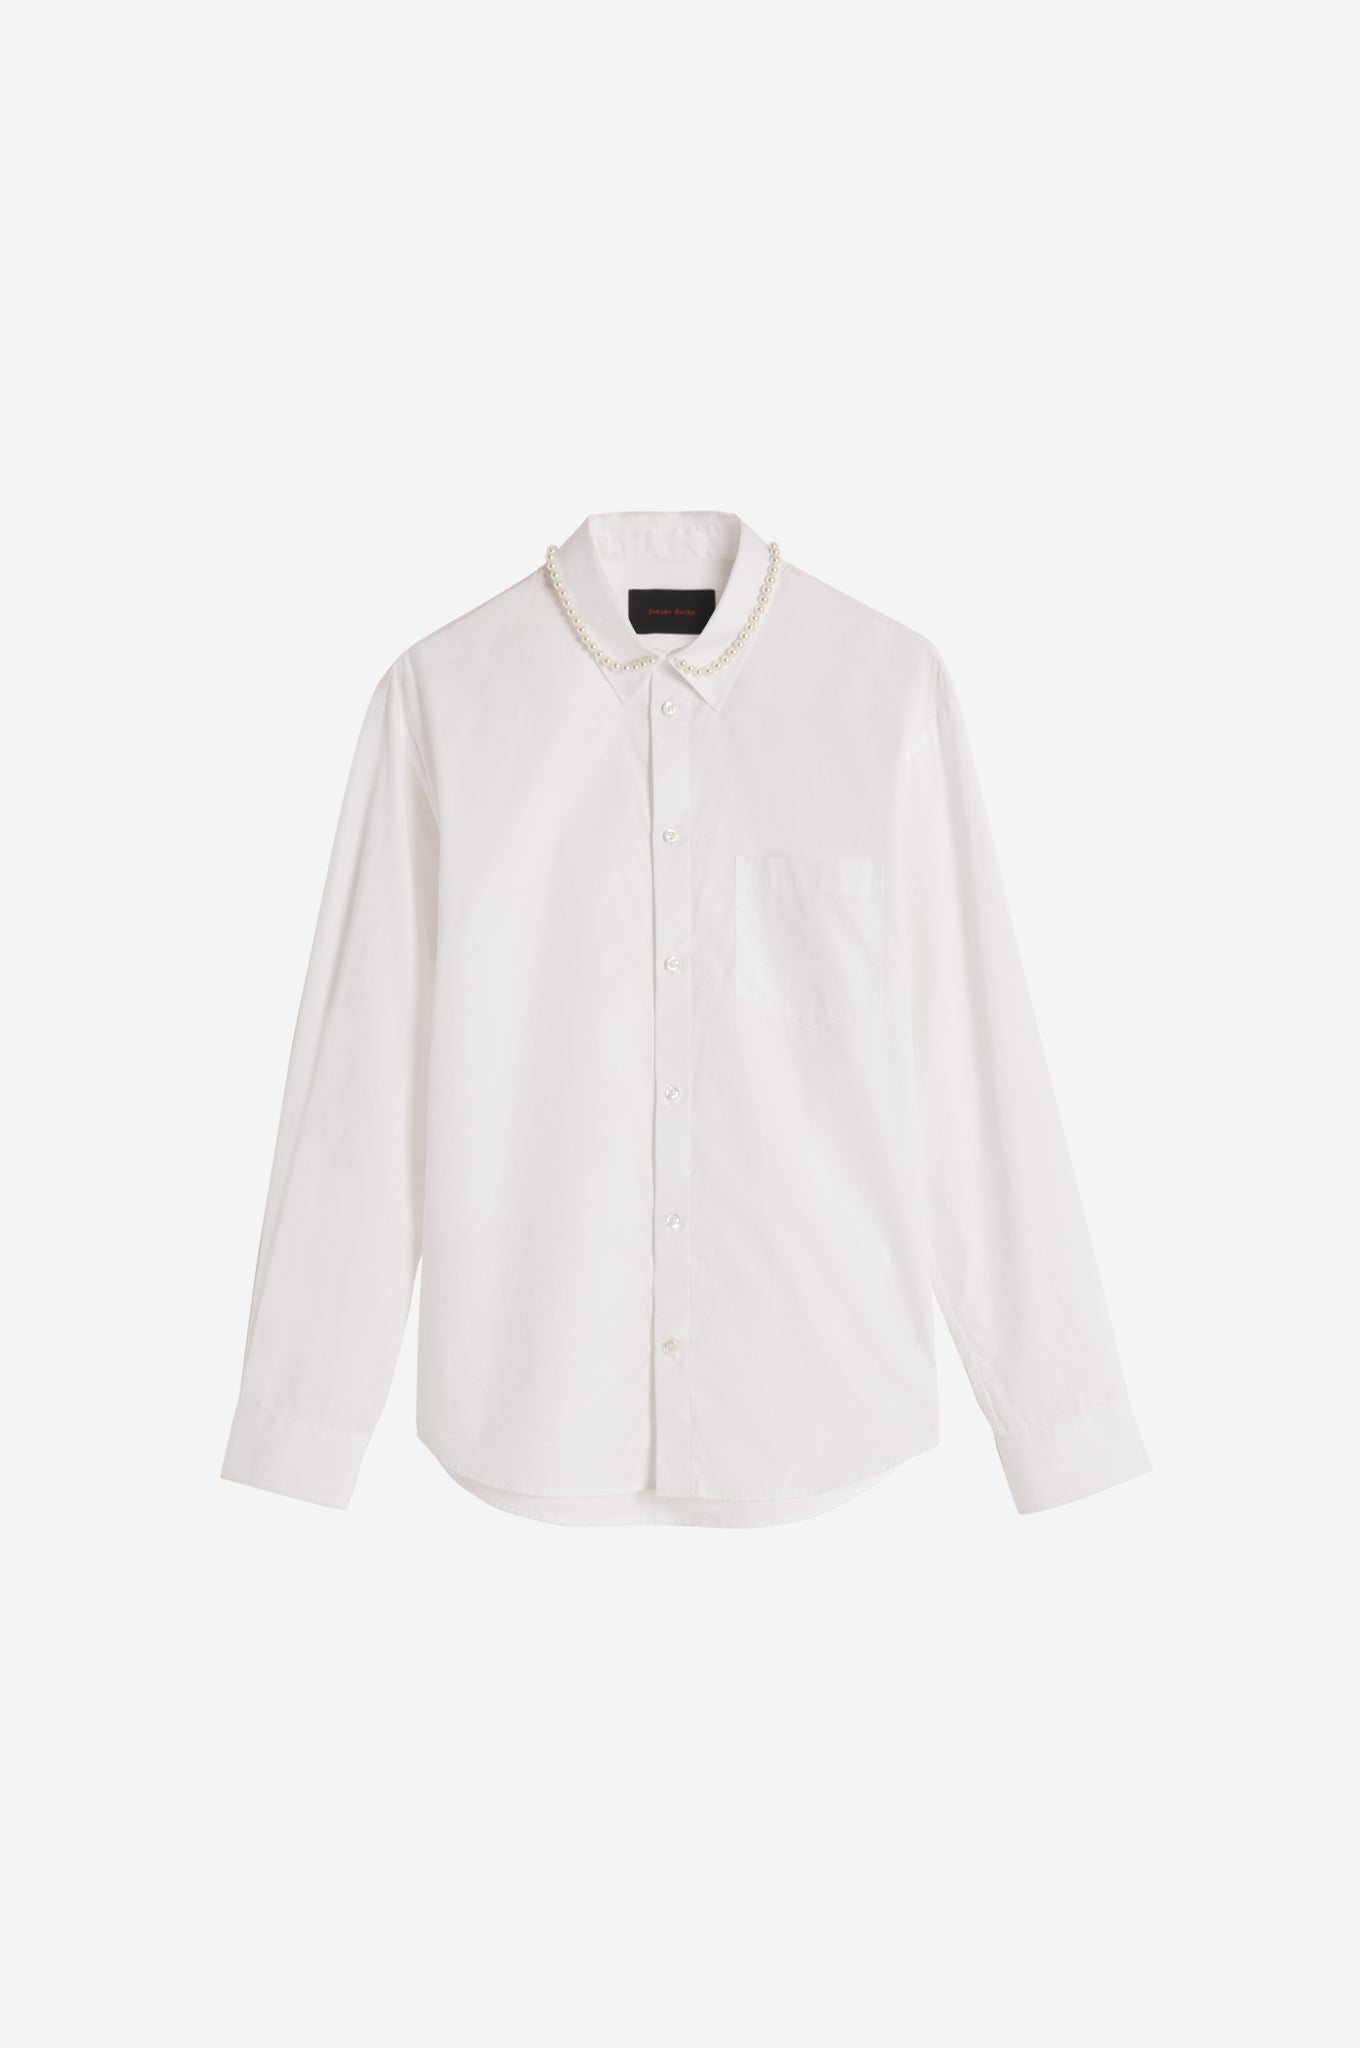 Classic Fit Shirt with Collar Embellishment